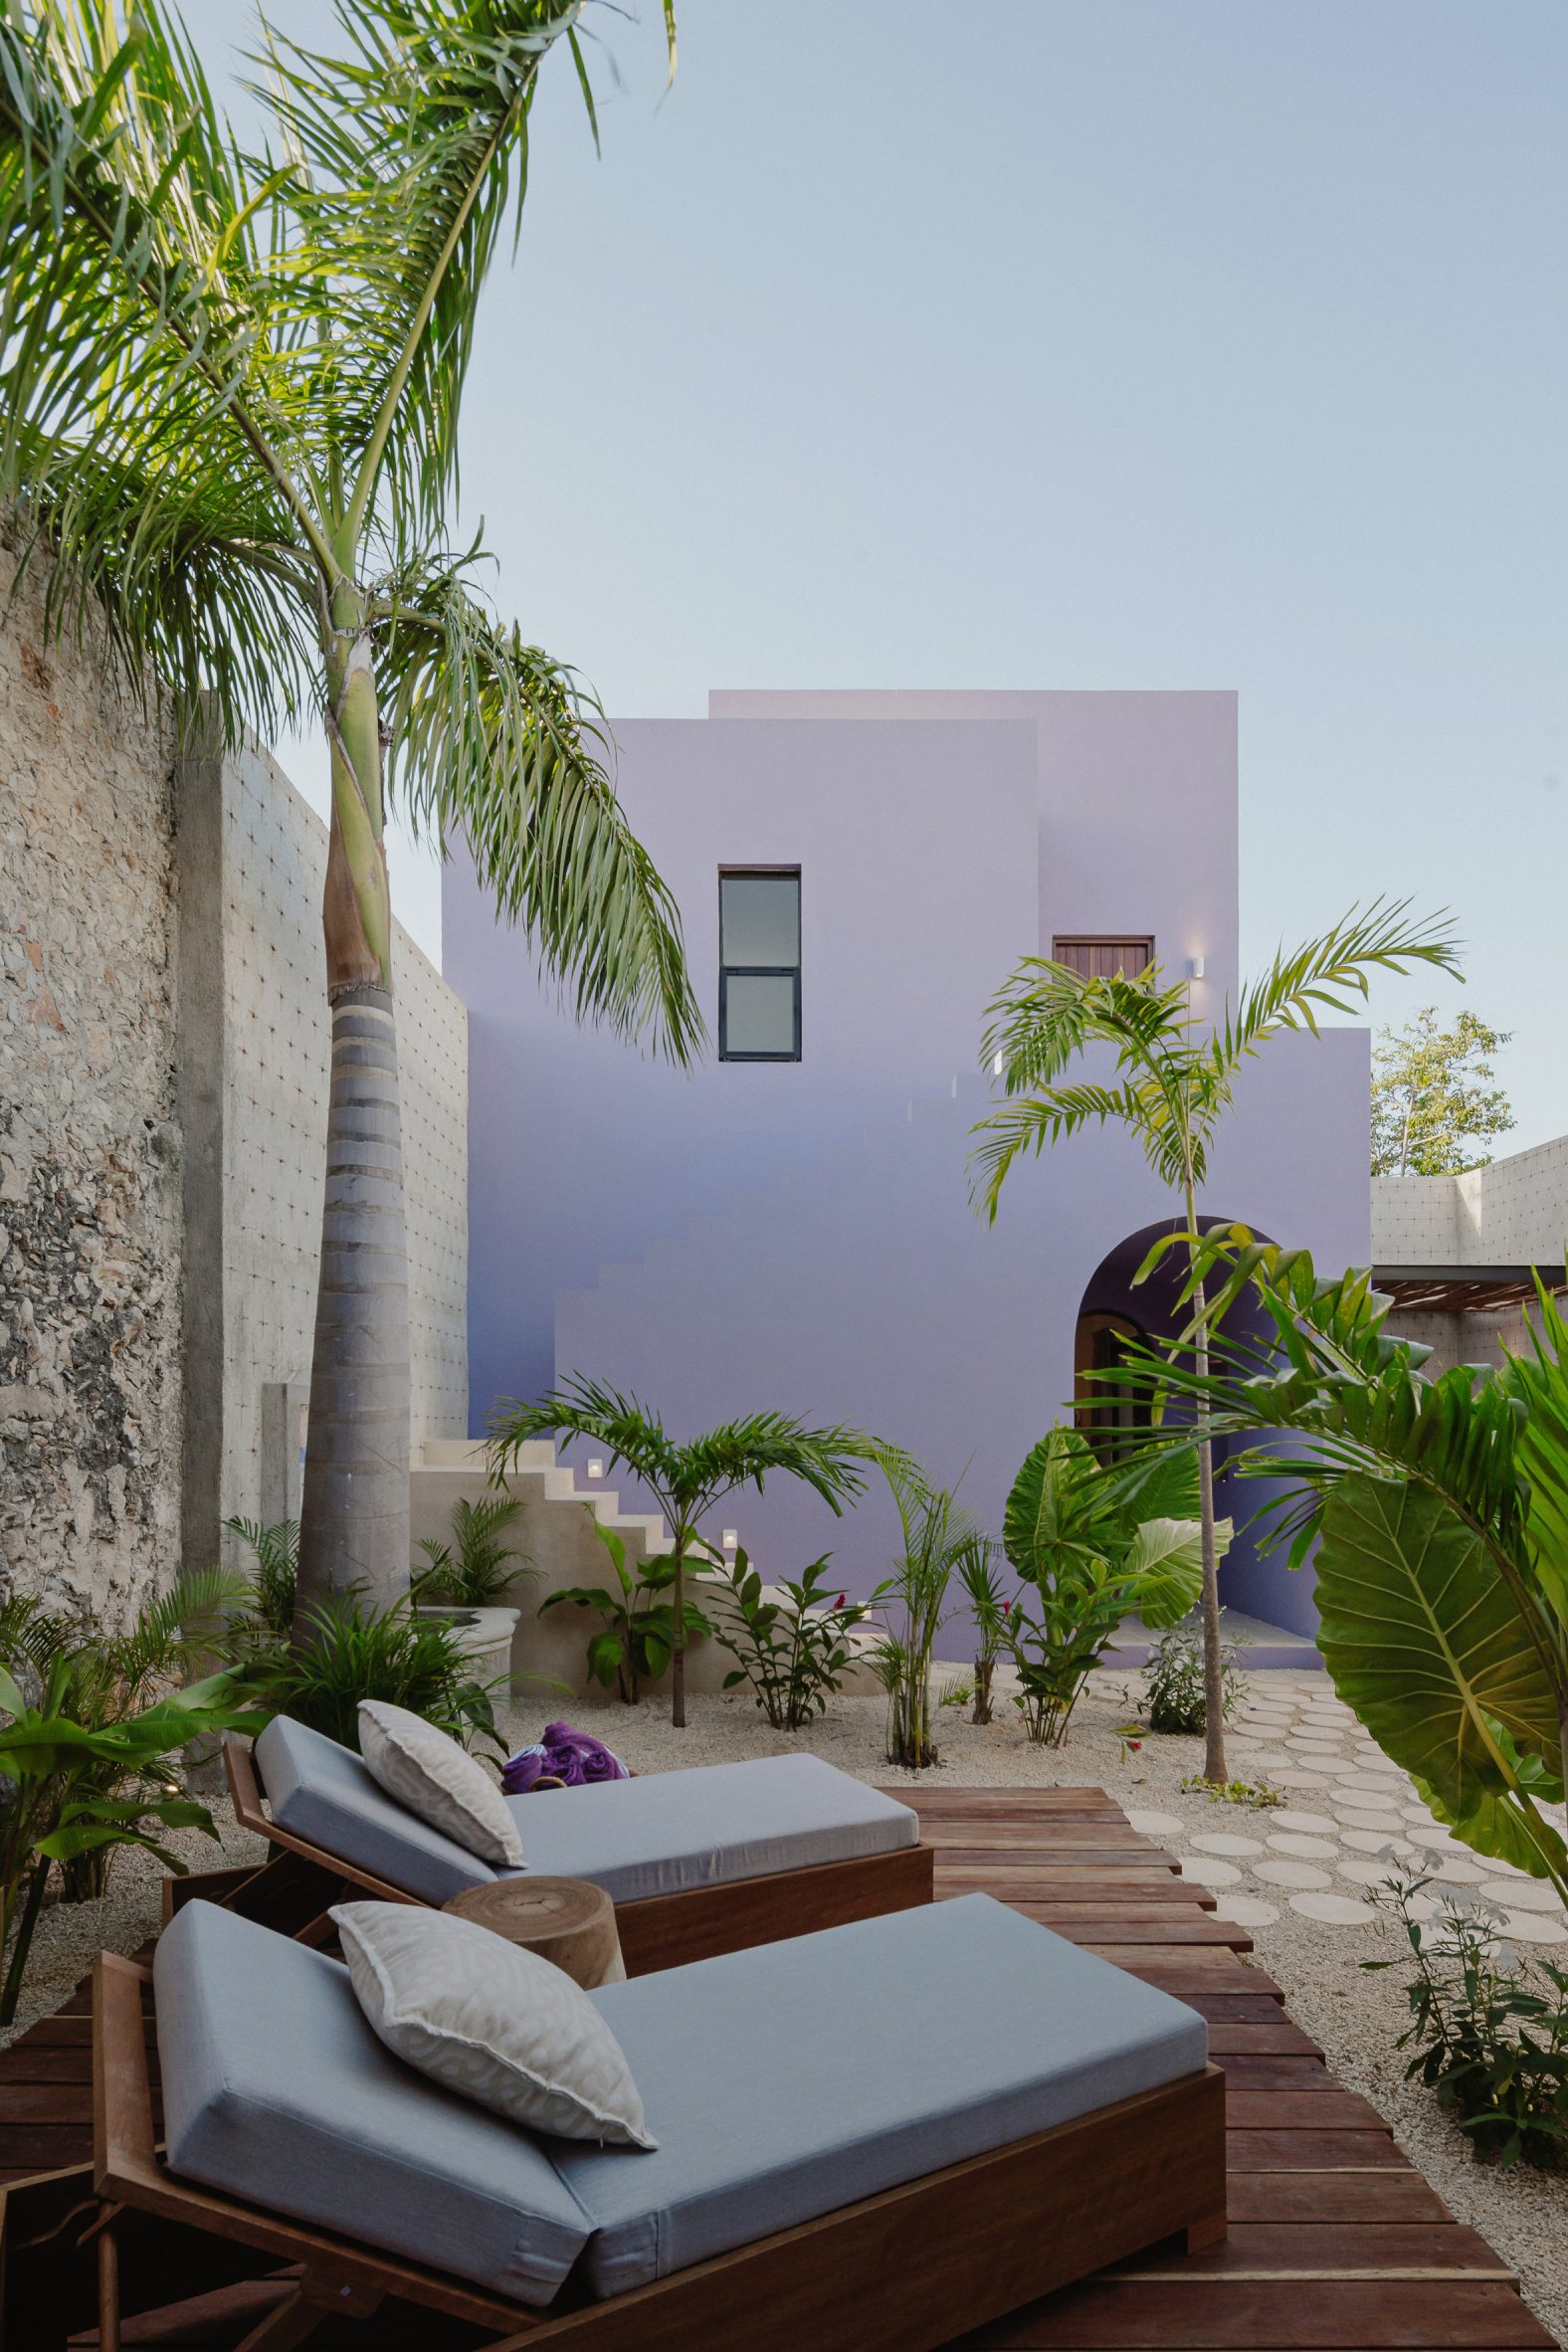 Purple two-storey cuboid house with sun lounges and palm trees